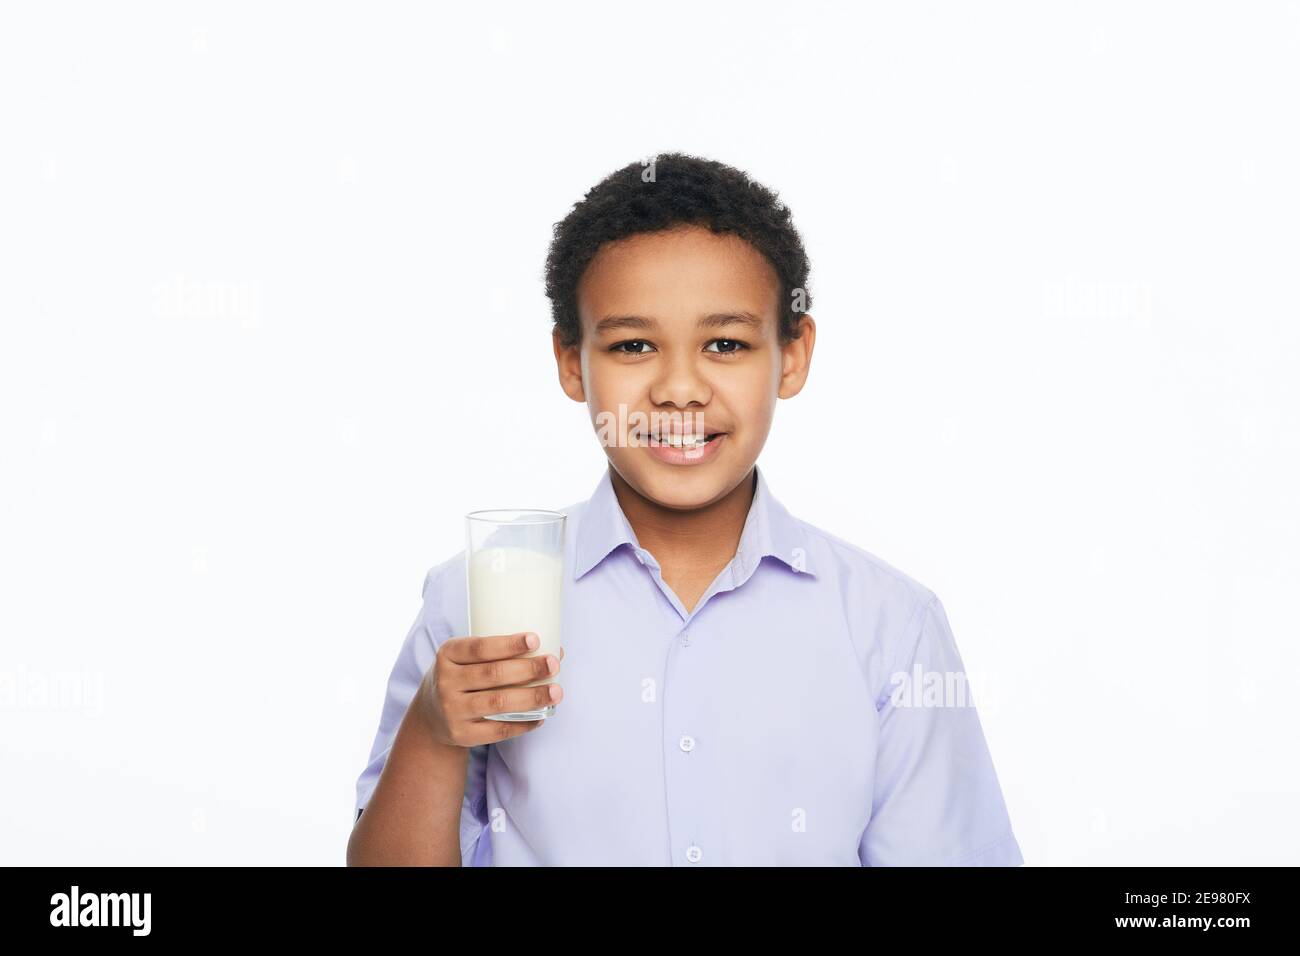 African American male kid holding a glass of milk with a toothy smile ...